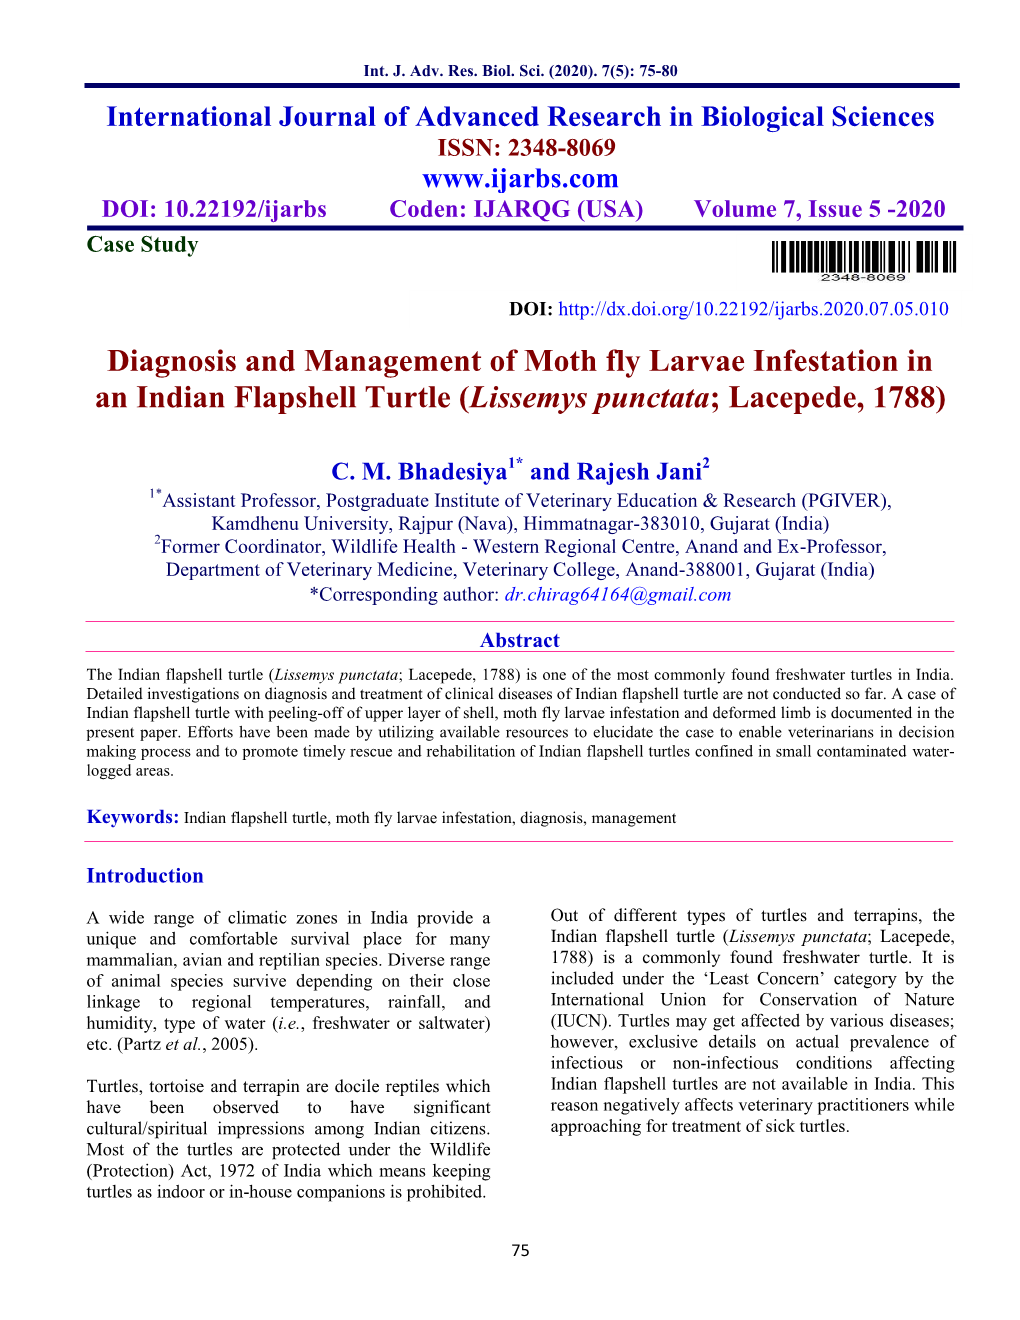 Diagnosis and Management of Moth Fly Larvae Infestation in an Indian Flapshell Turtle (Lissemys Punctata; Lacepede, 1788)